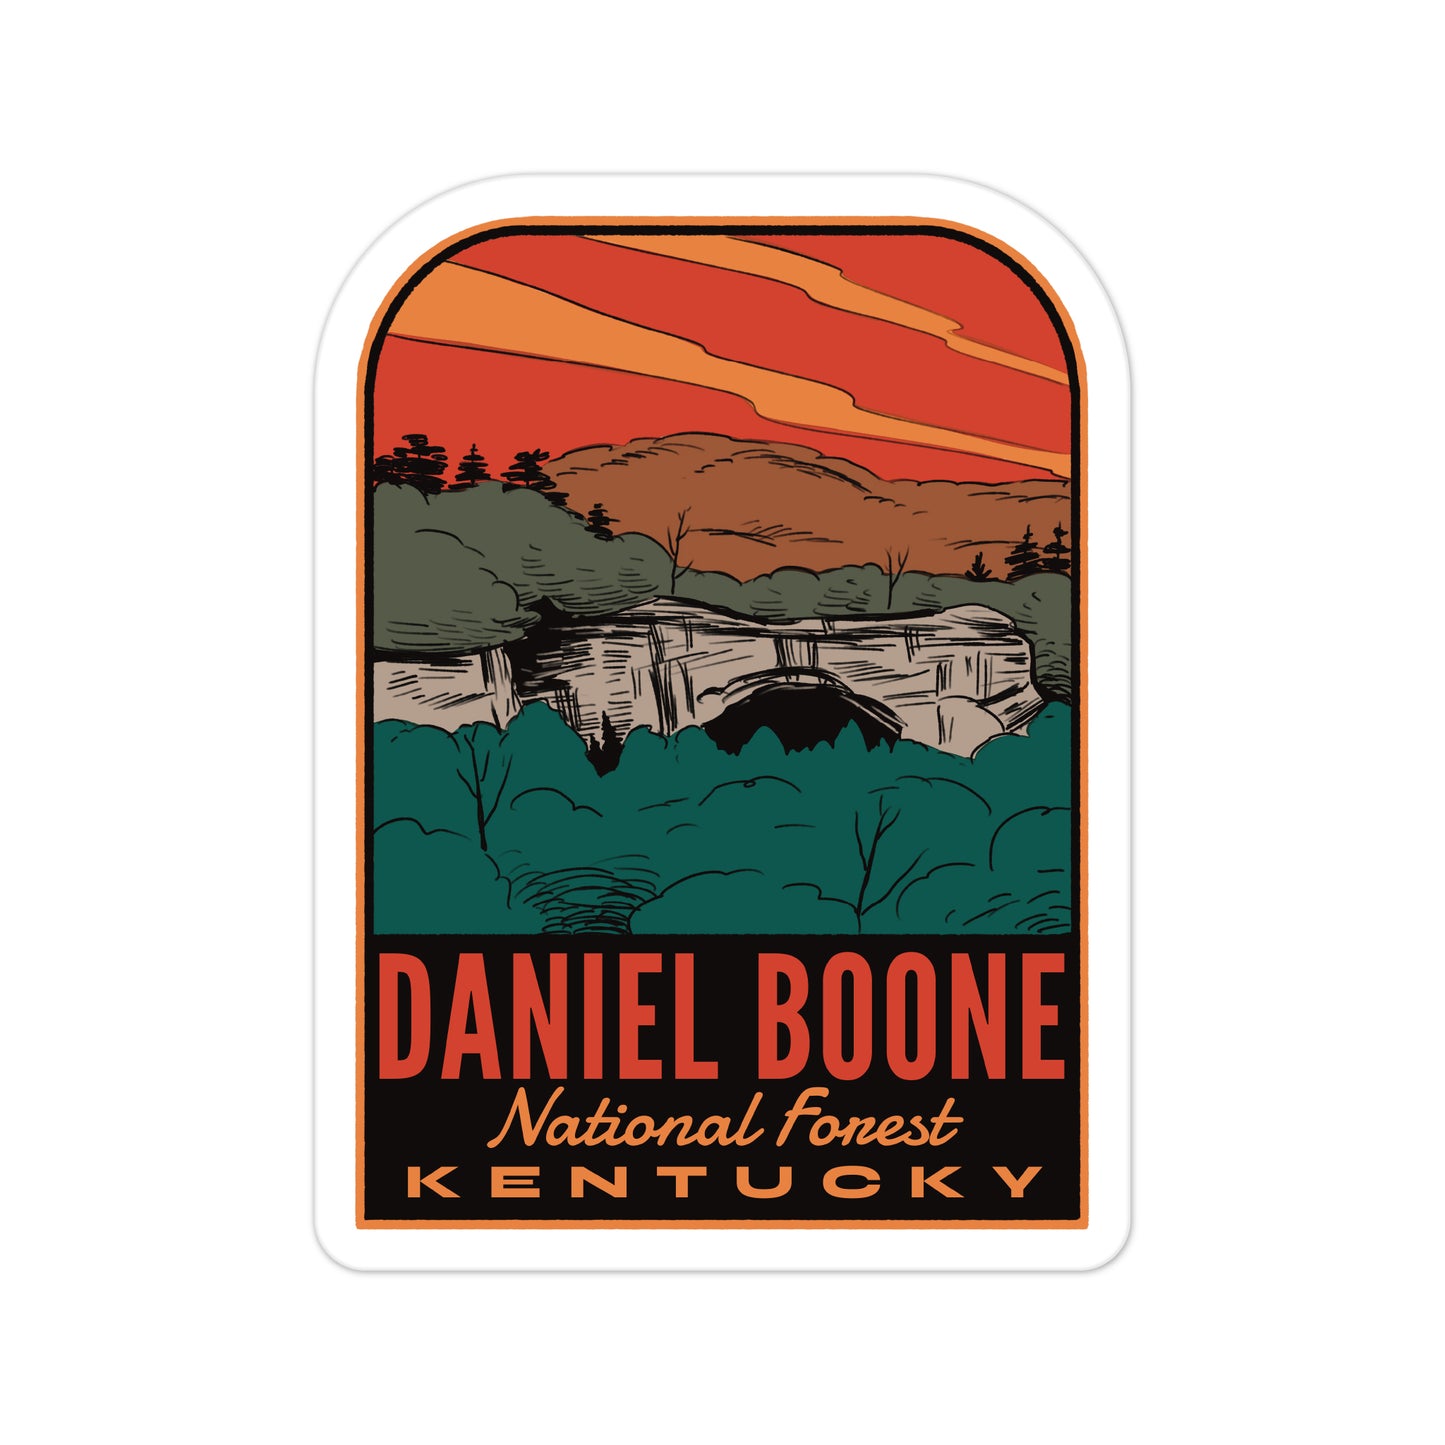 A sticker of Daniel Boone National Forest